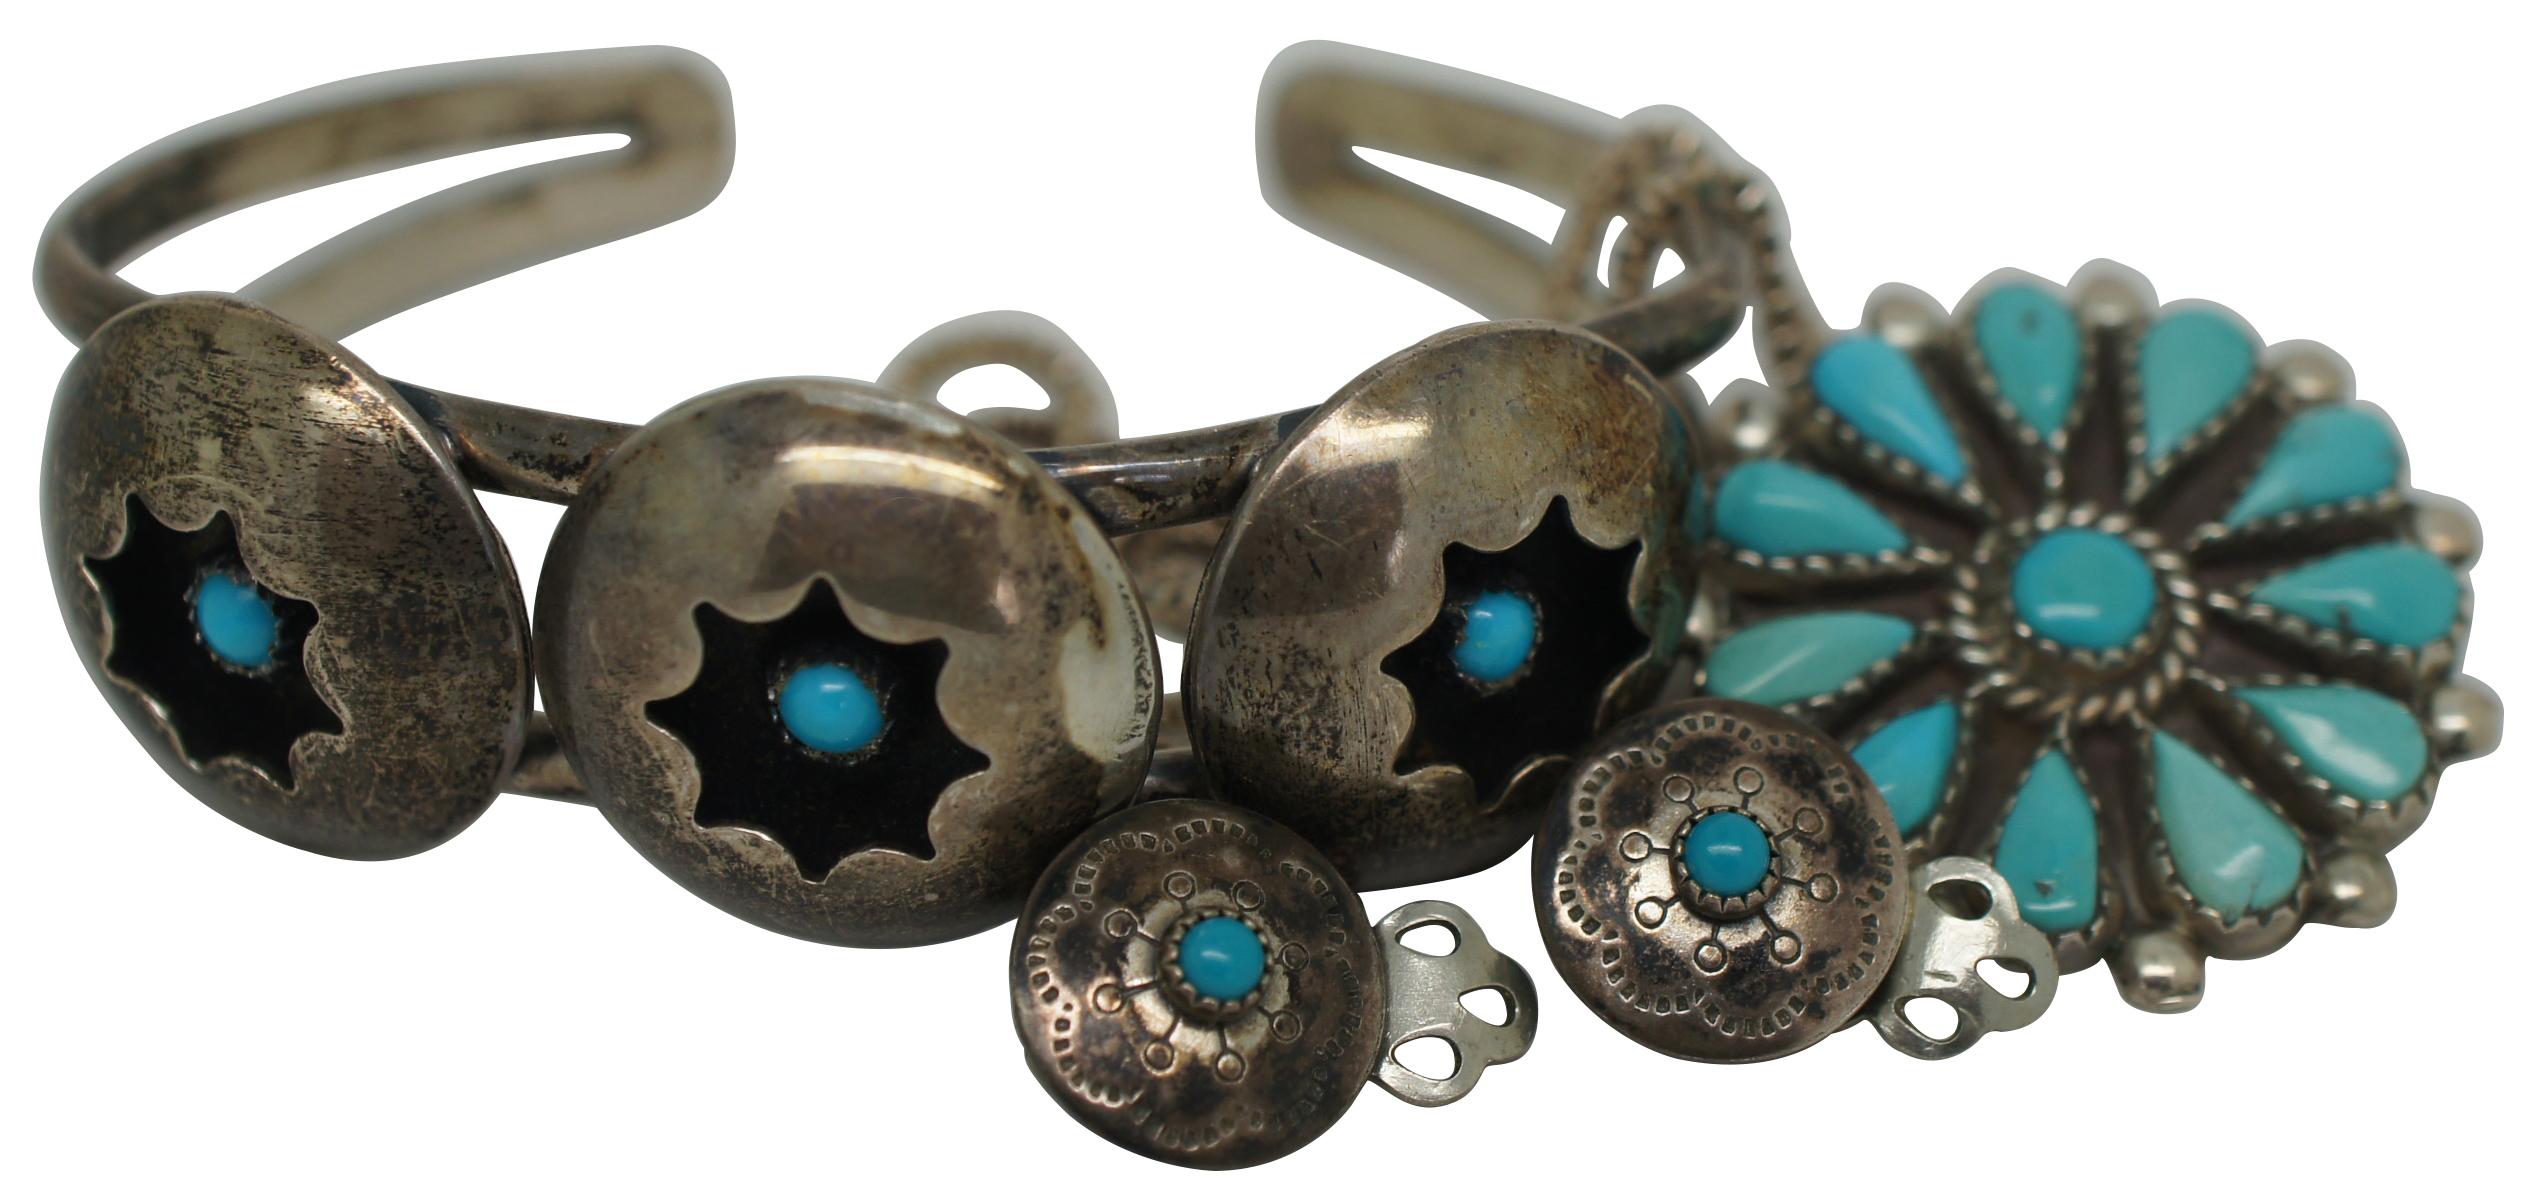 Vintage set of Native American / Navajo Zuni petit point turquoise sterling silver jewelry including a cuff bracelet, clip on earrings and a pendant / pin by artisan Phyllis Gilbert Ortega.

Zuni Petit point Jewelry began around 1920-1930 and was